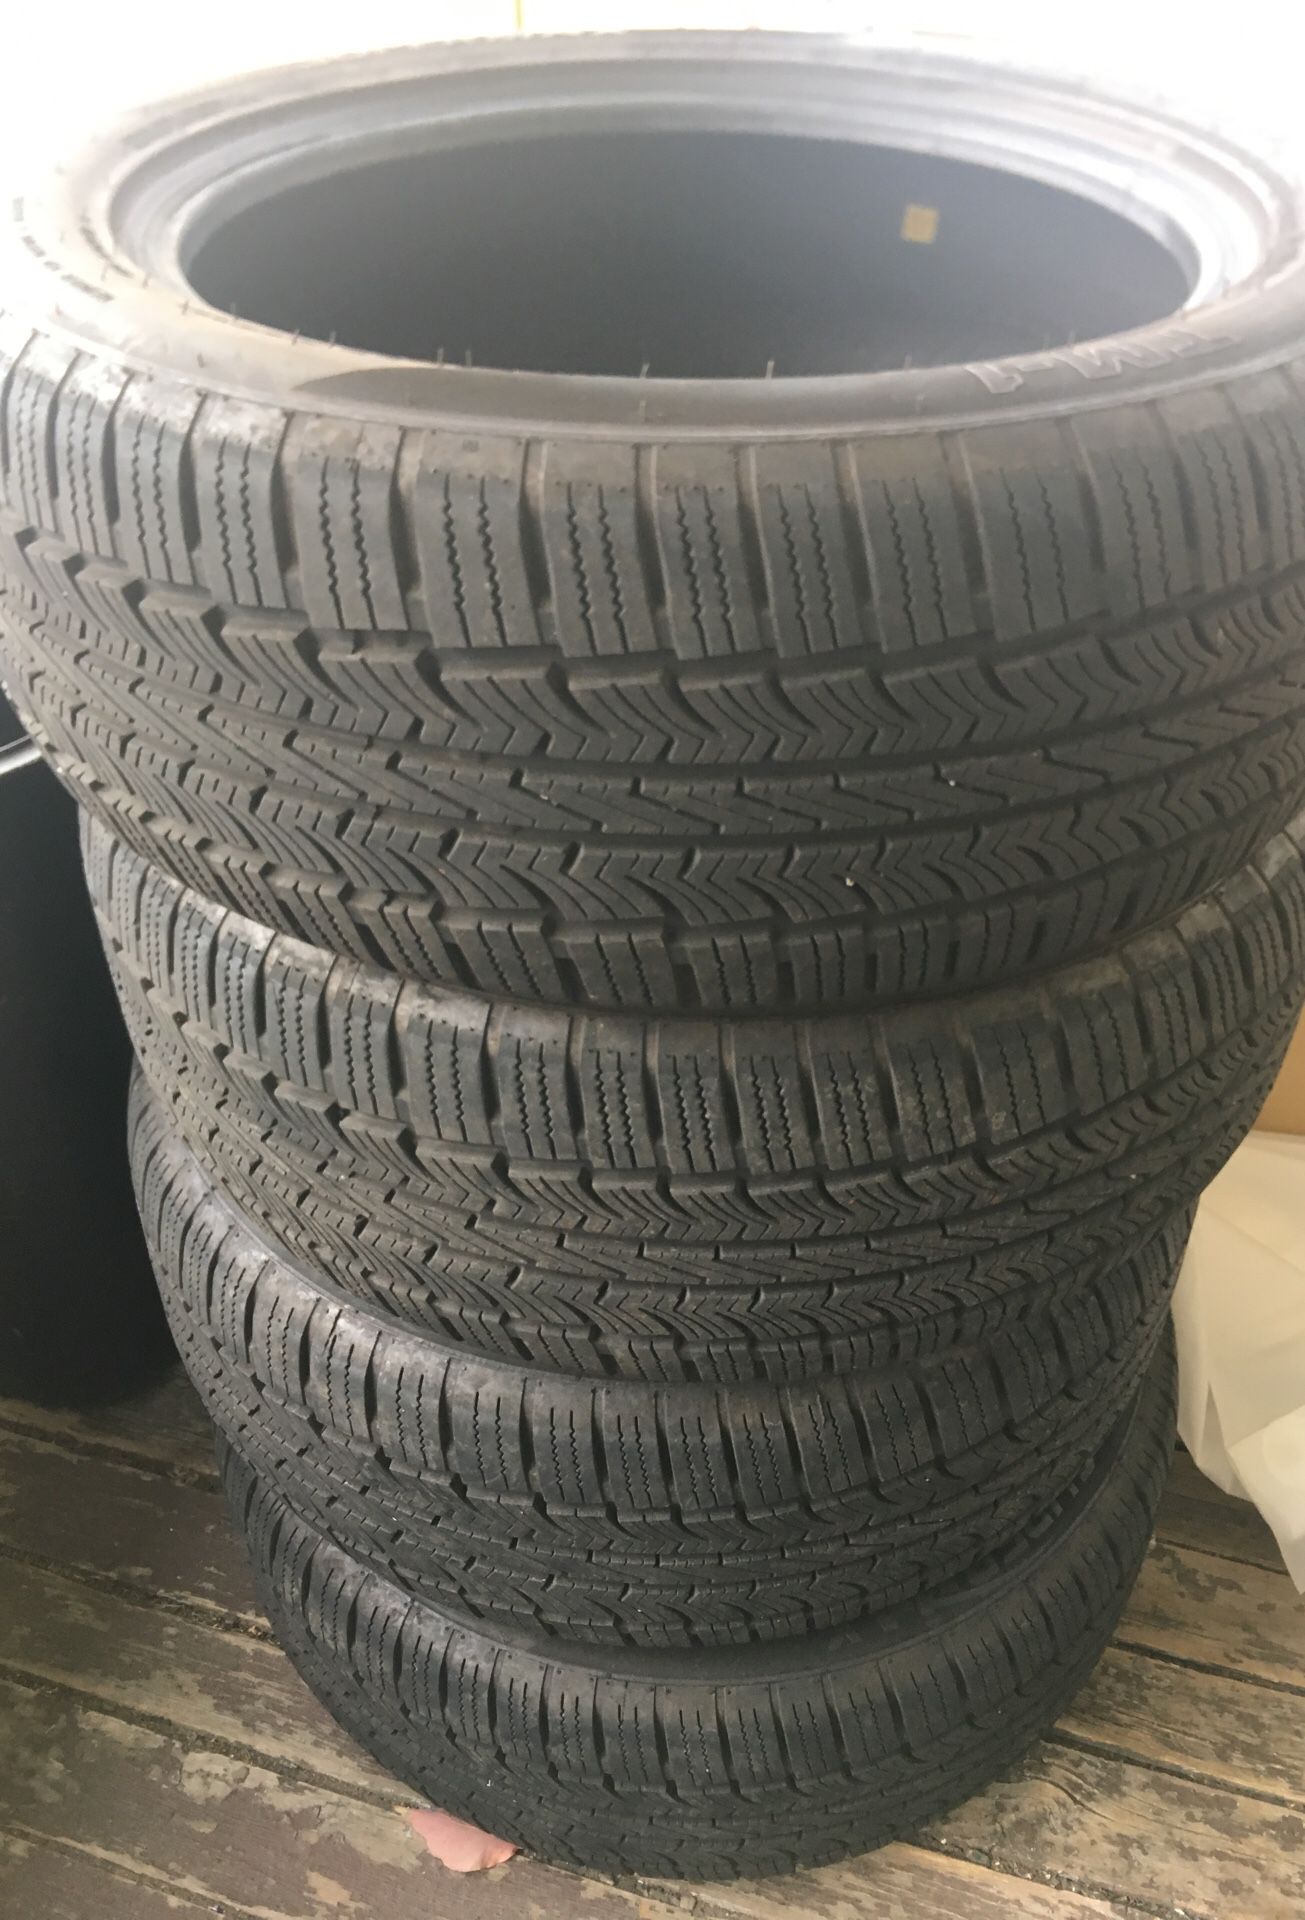 Tires size 225 50 17 less than 2000 miles supper max 50km tires